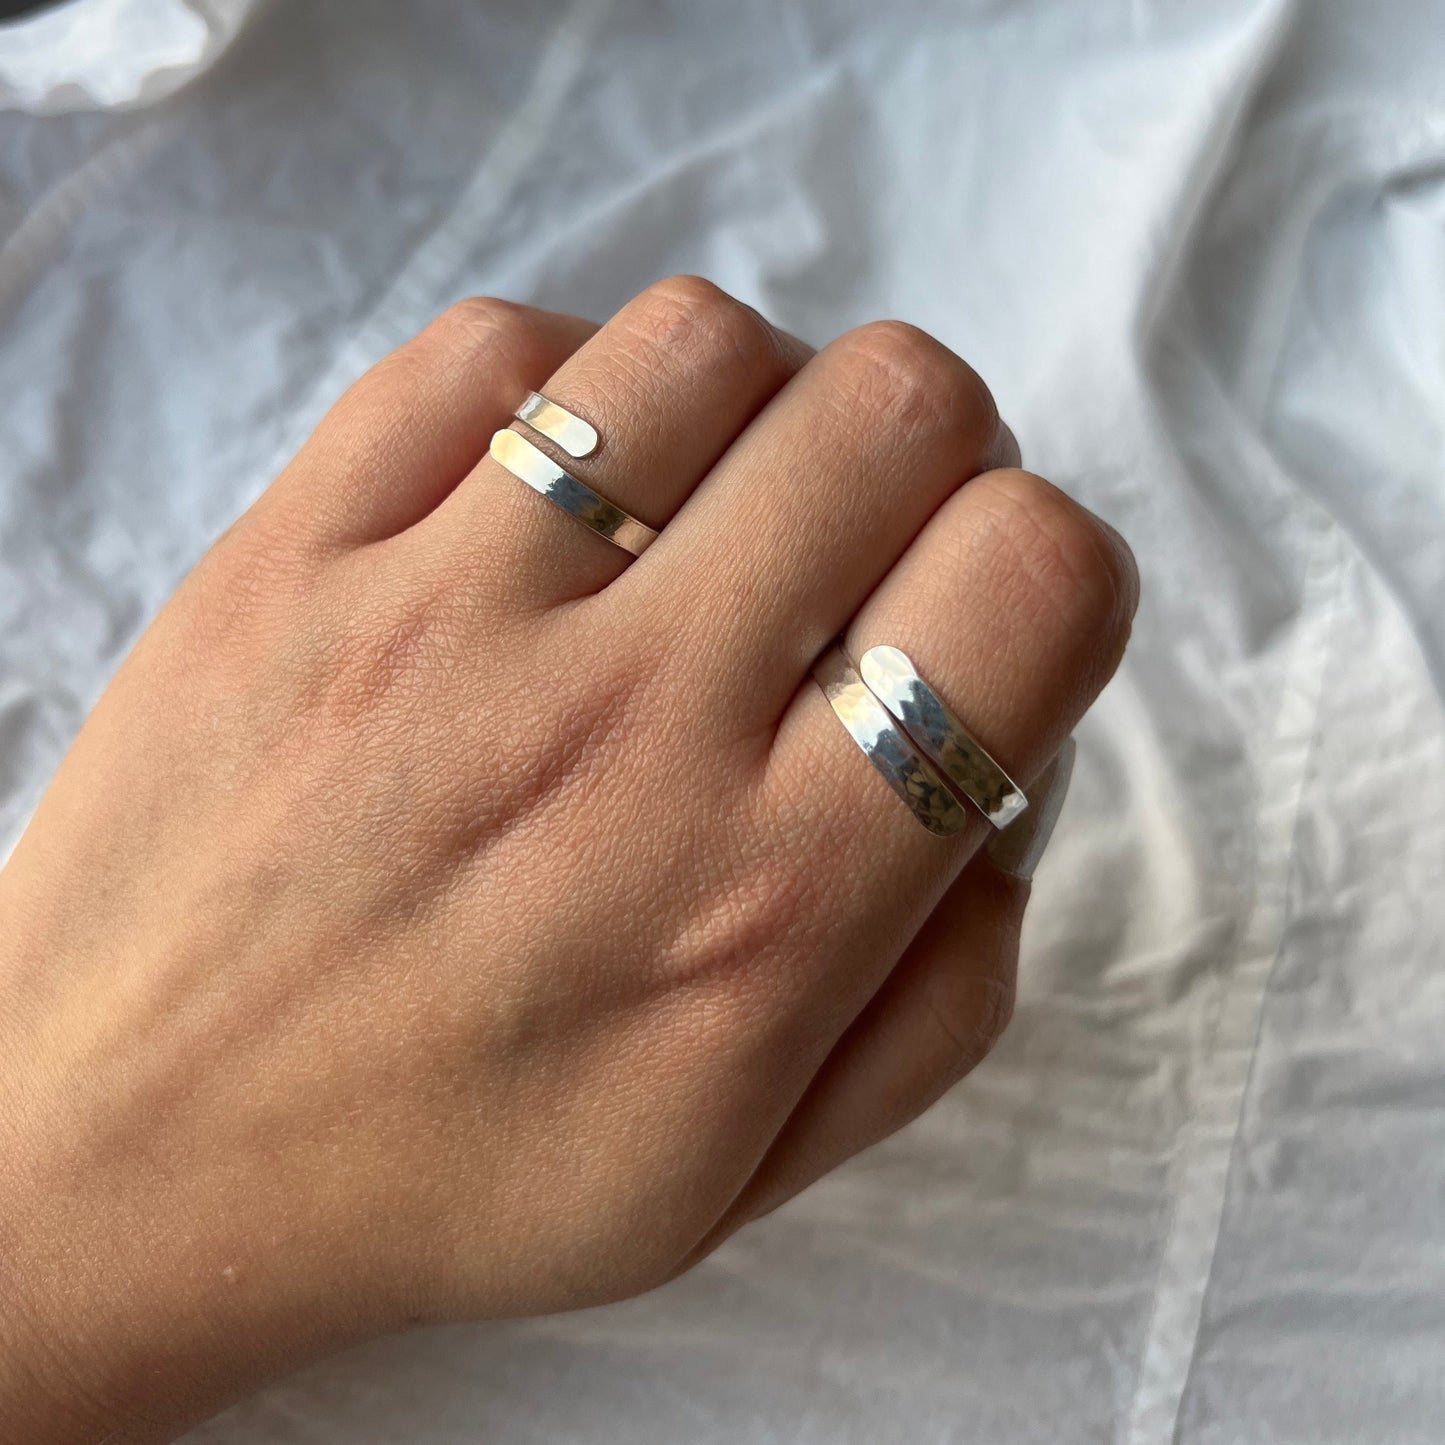 Adjustable sterling silver ring with engraving